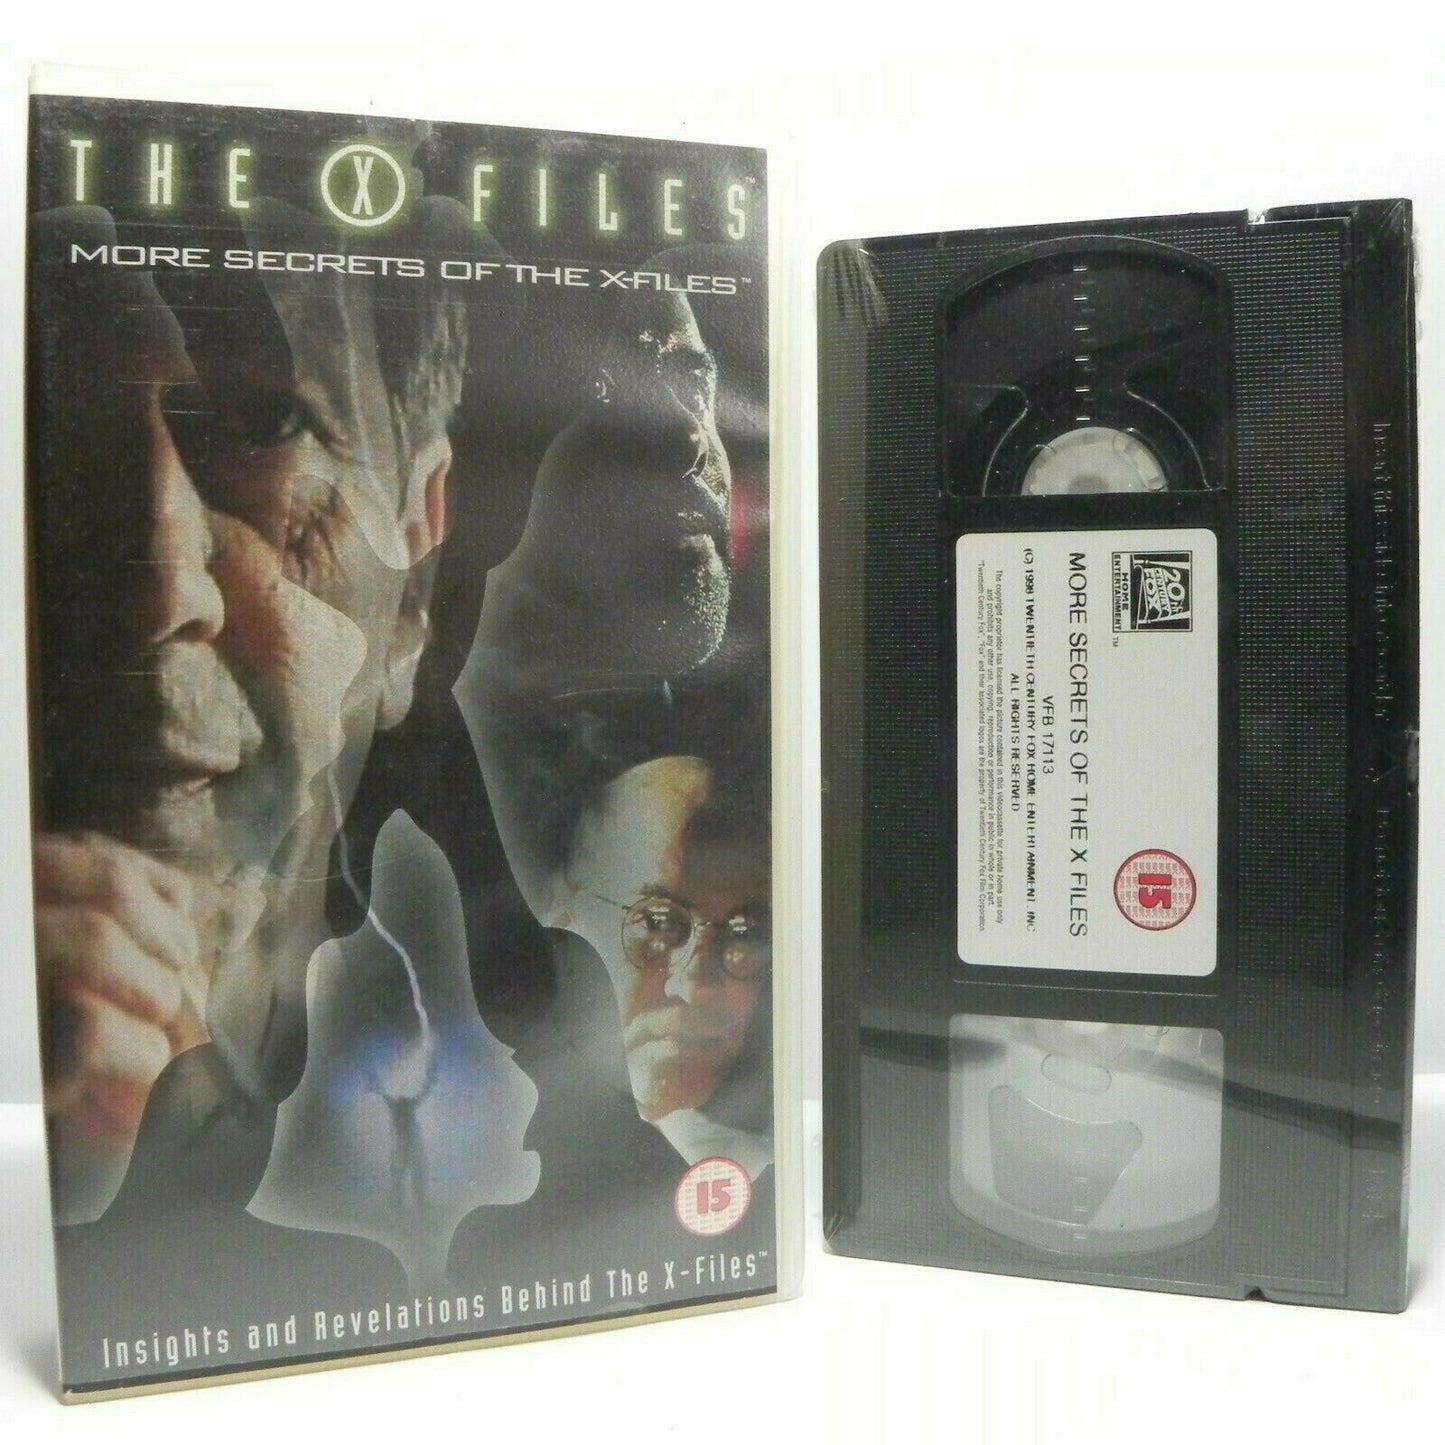 The X Files: More Secrets - Documentary - Behind The Scenes - Interviews - VHS-